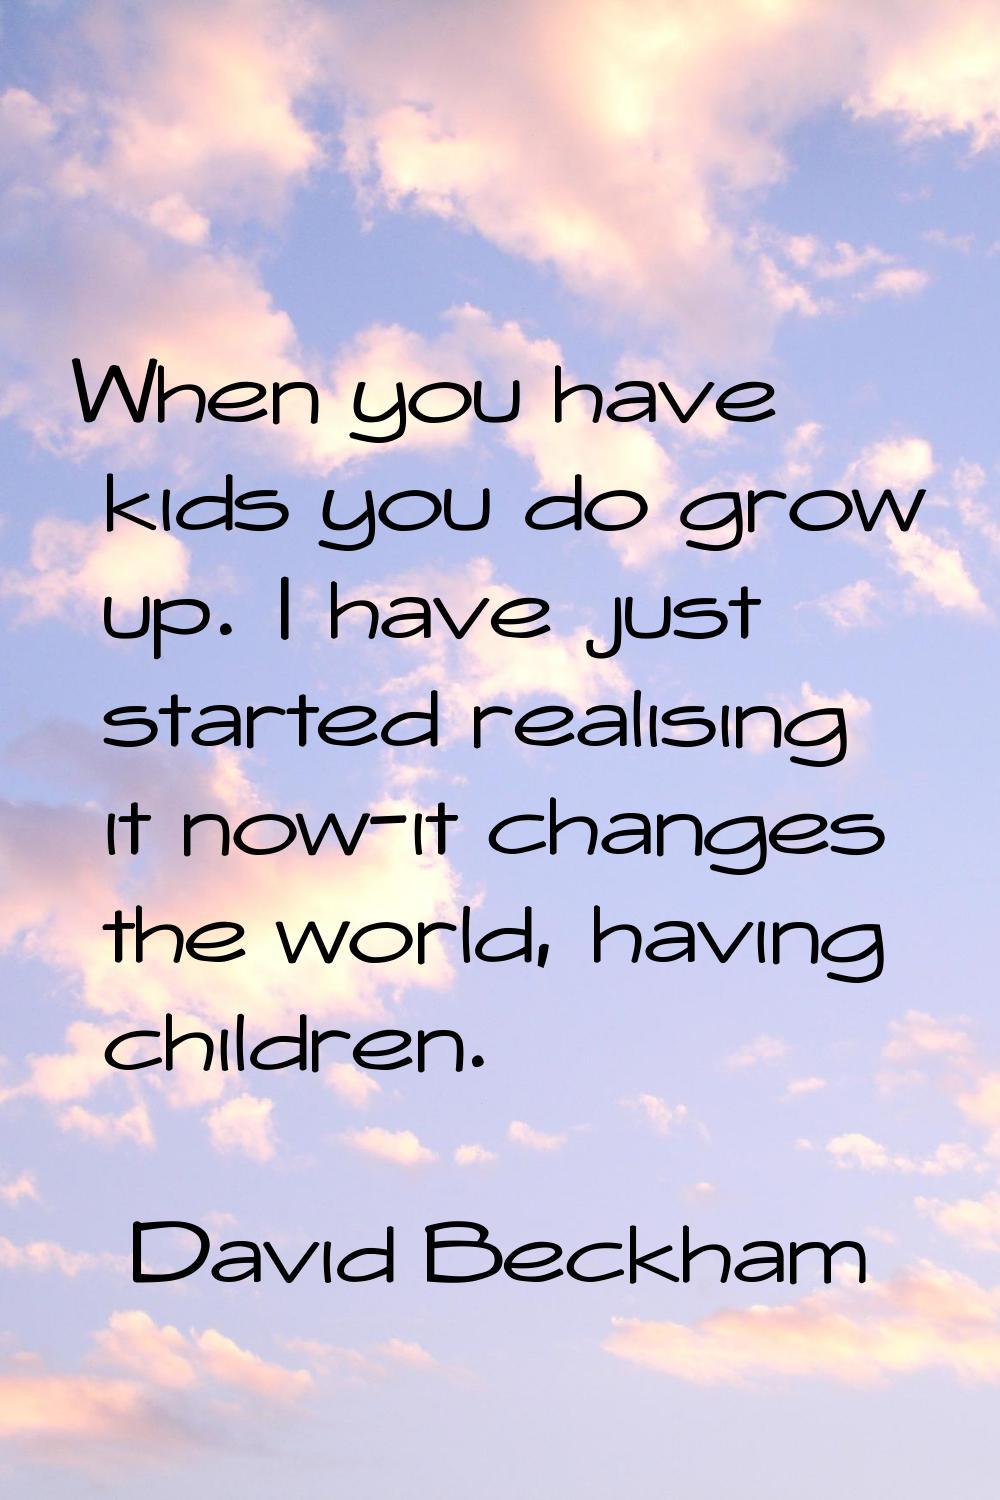 When you have kids you do grow up. I have just started realising it now-it changes the world, havin